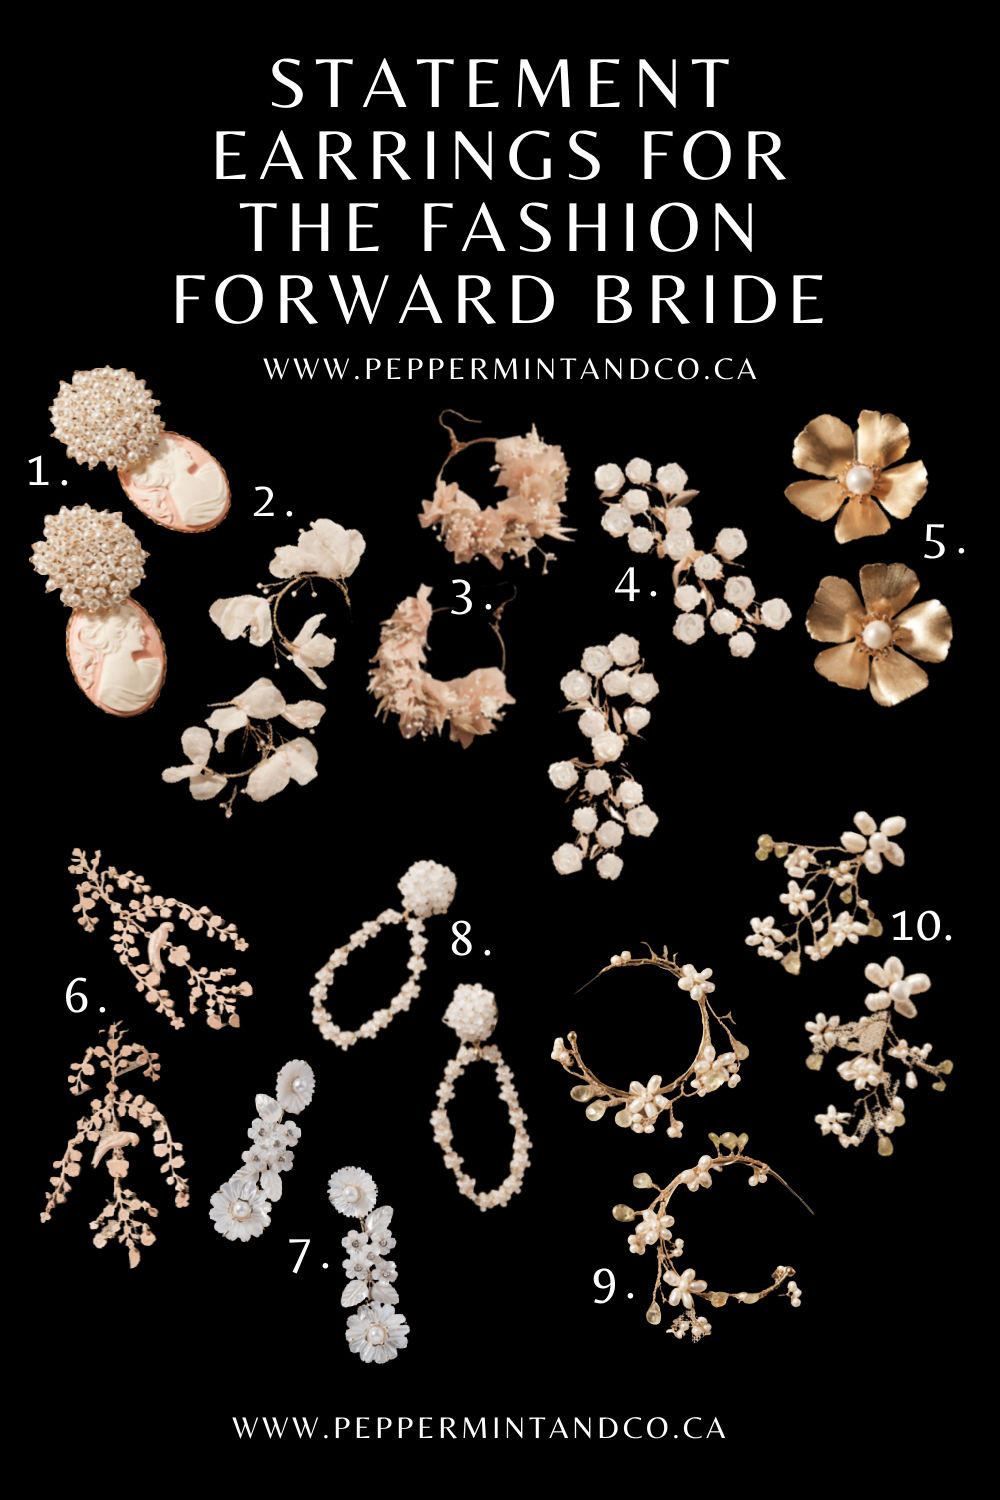 Statement Earrings for the Fashion Forward Bride